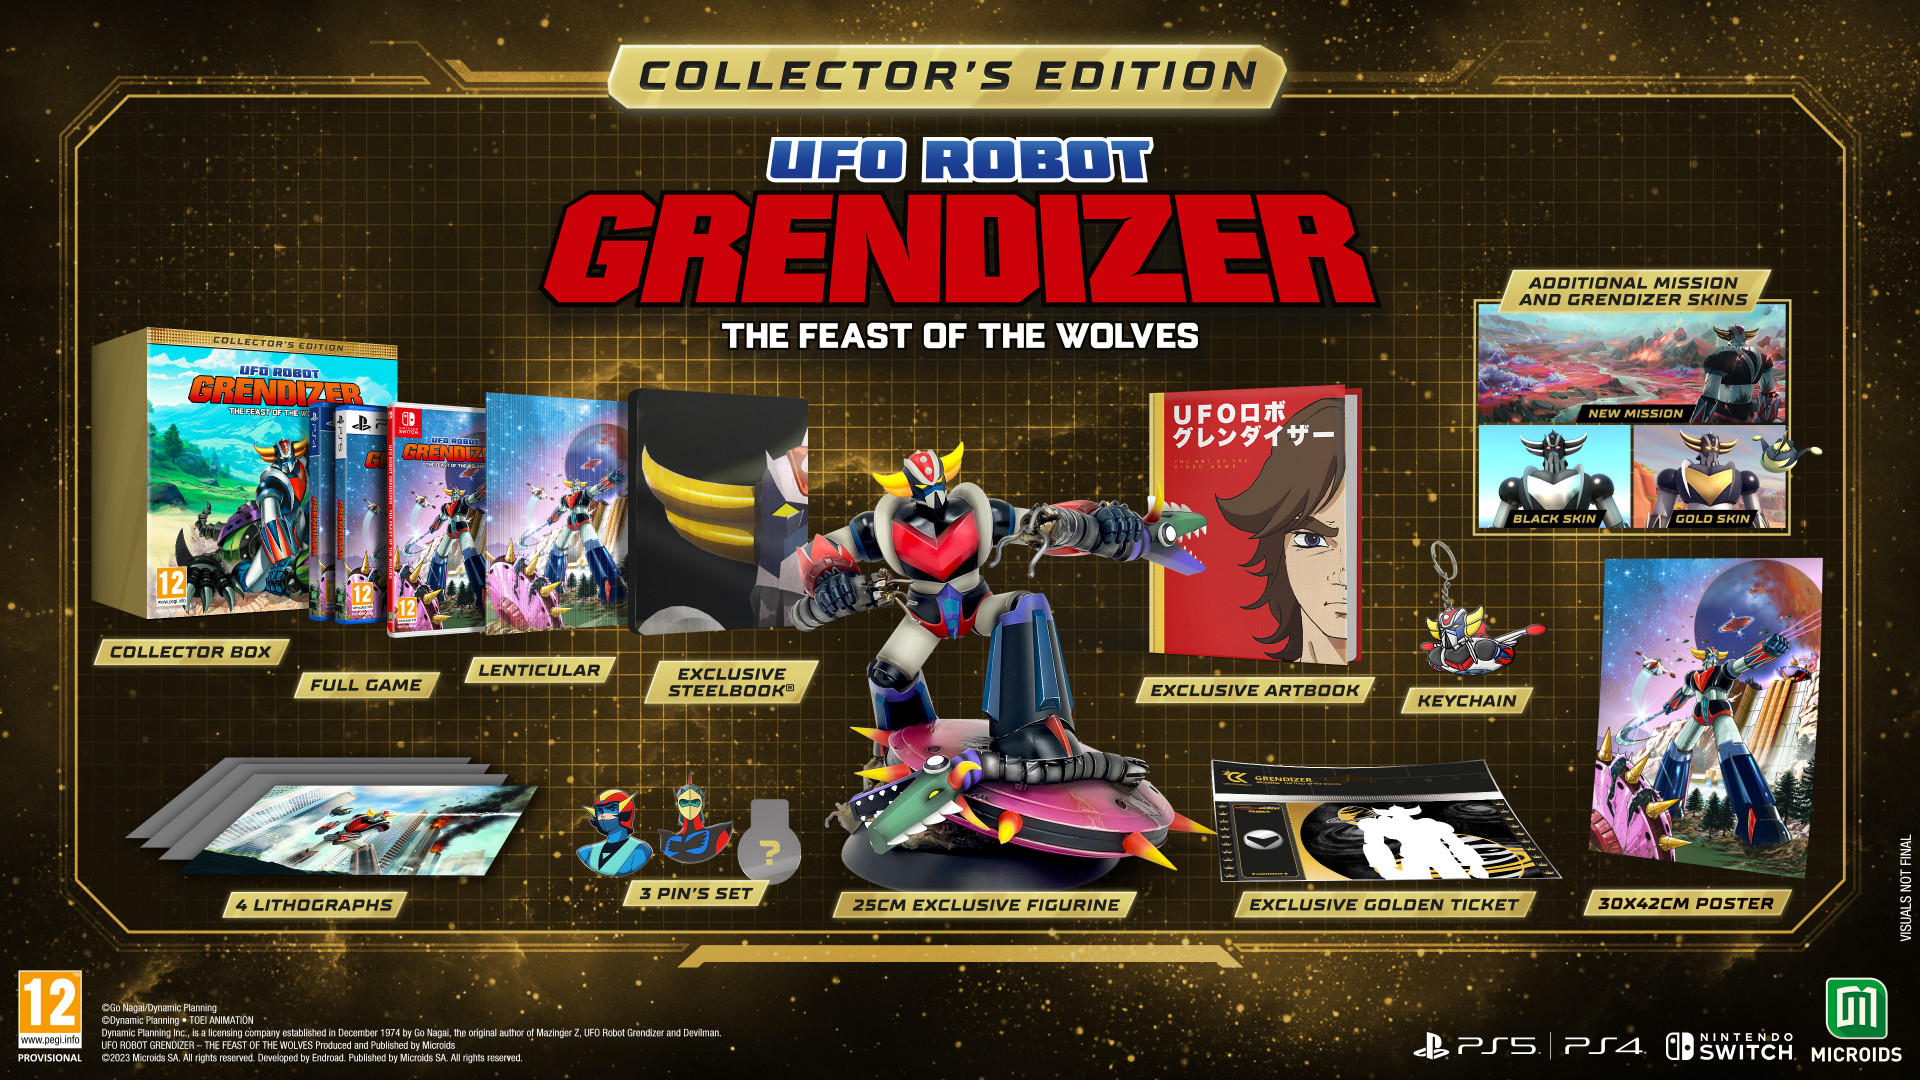 UFO Robot Grendizer: The Feast of the Wolves - Collector's Edition (PS5), Microids